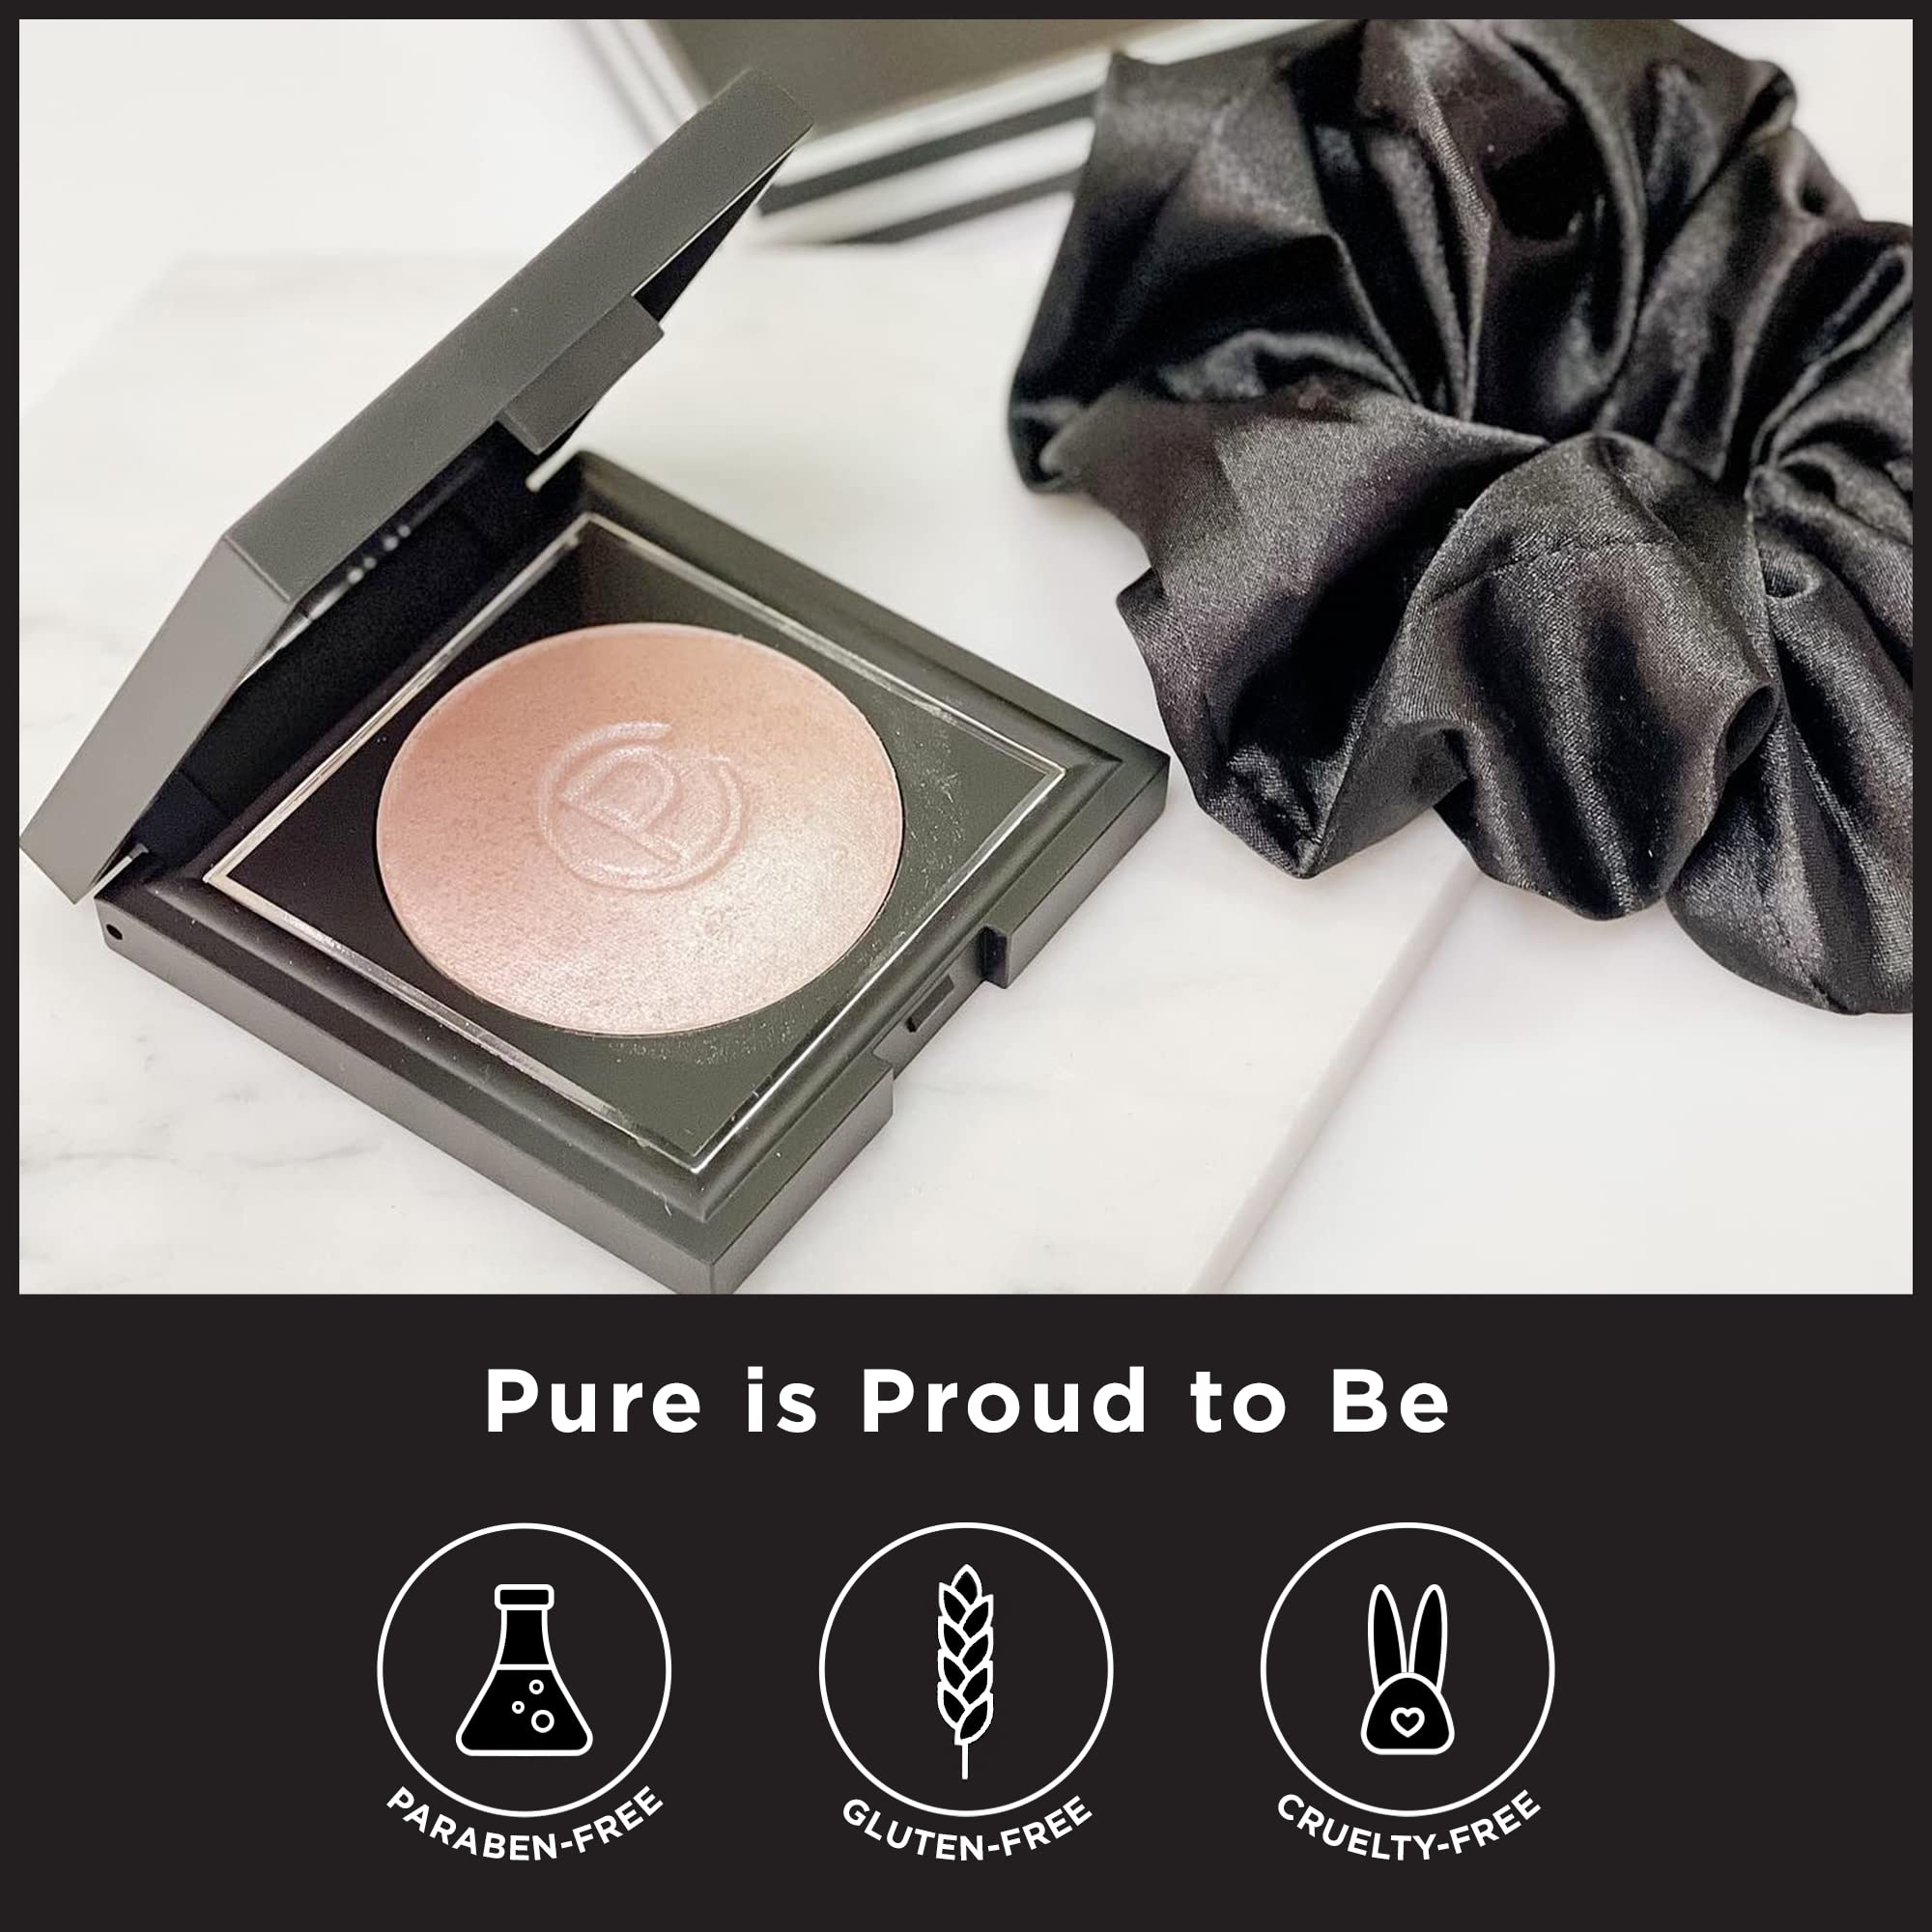 Velvet Vixen Moonlight Highlighter Makeup by Pure Cosmetics - Plush, Silky Highlighter Softens & Refines Appearance for Radiant, Luminous Finish - Formulated for All Skin Types - Paraben and Talc-Free